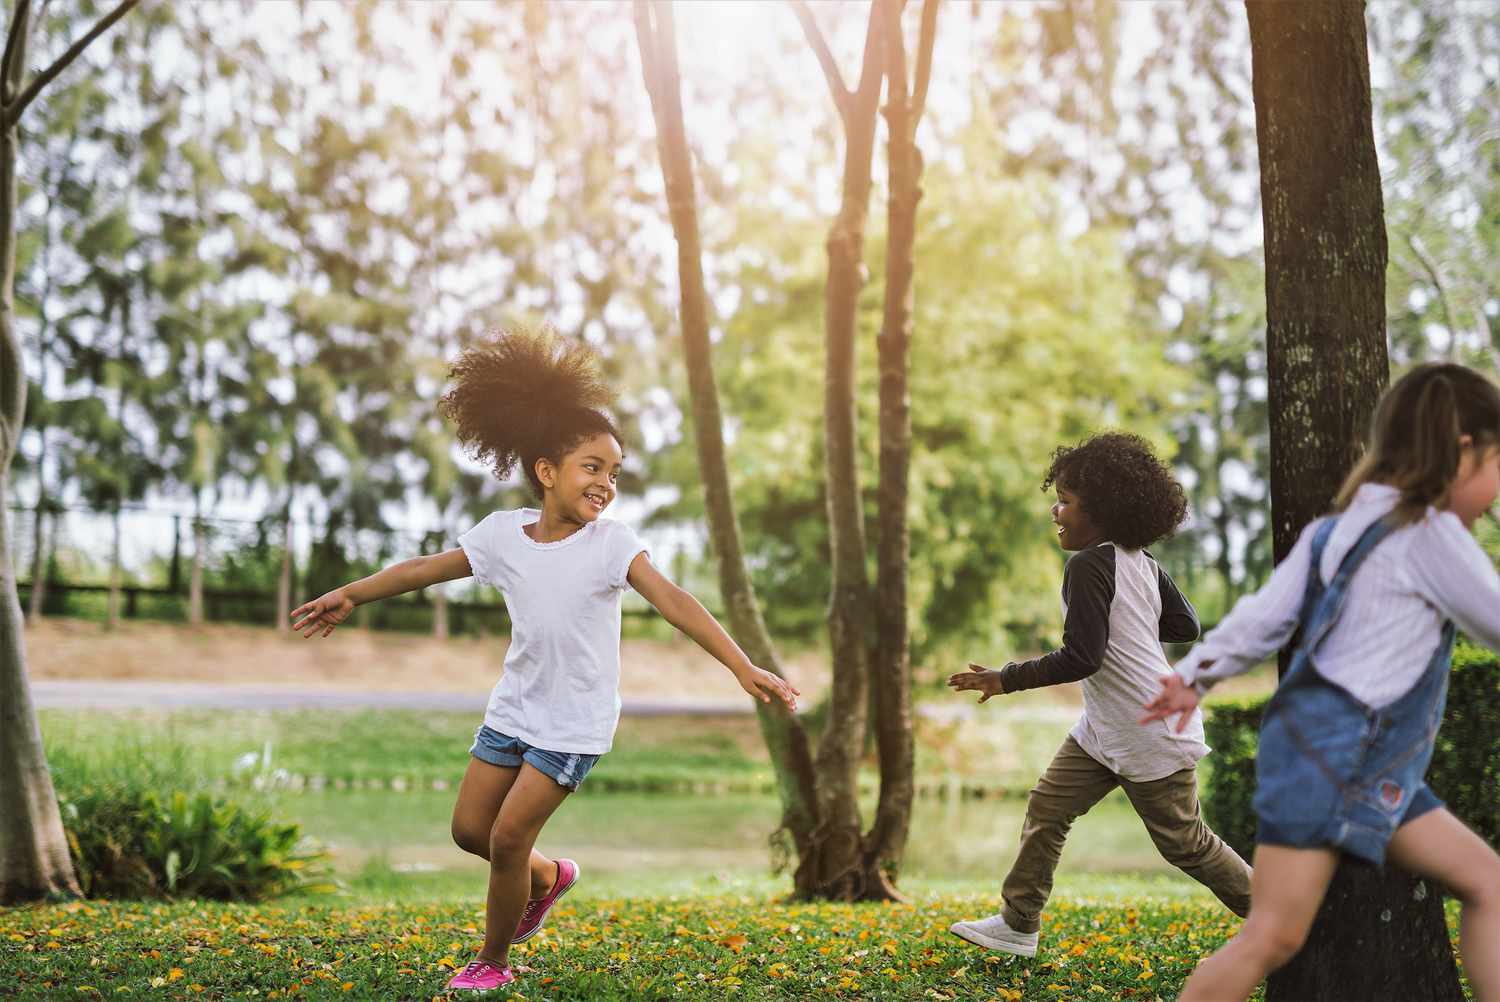 Why Outdoor Play Is Important For Preschoolers